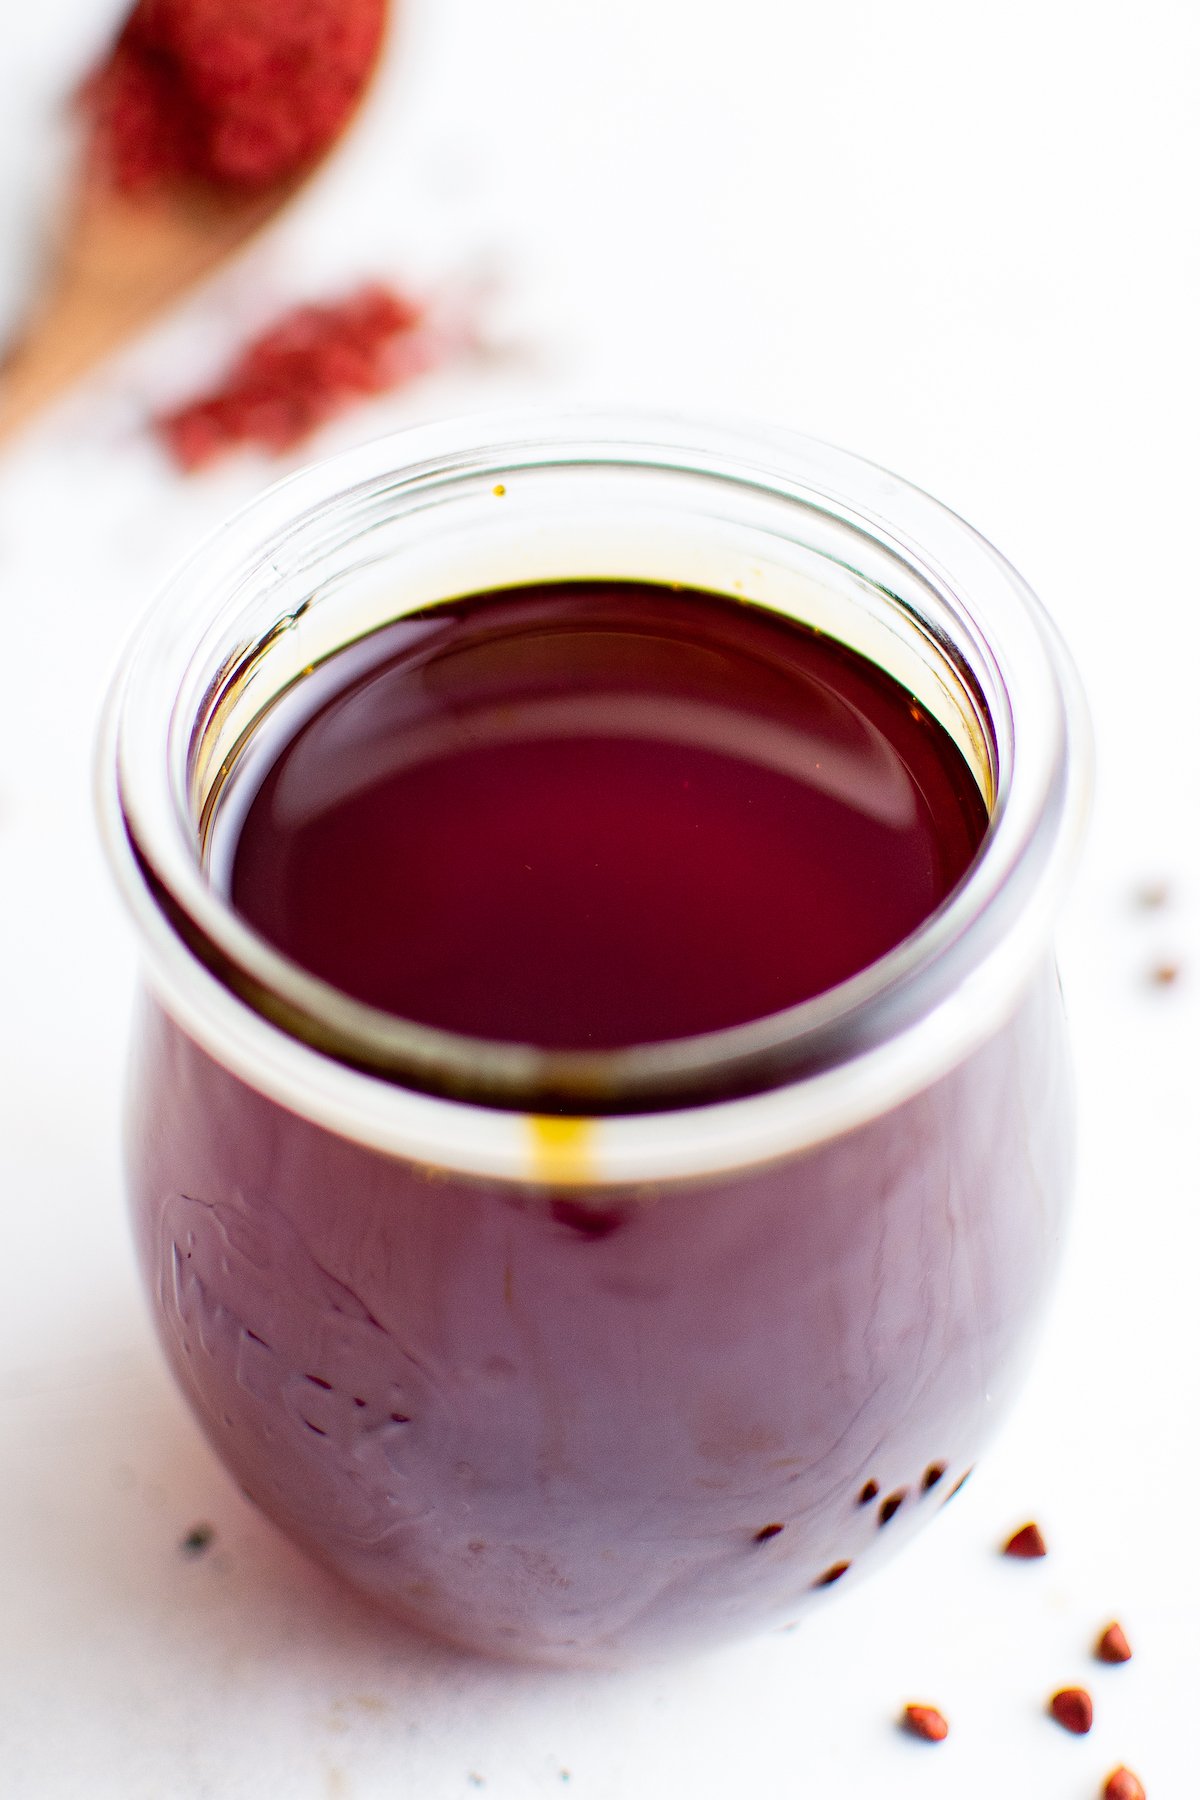 A small glass jar of red-gold oil.